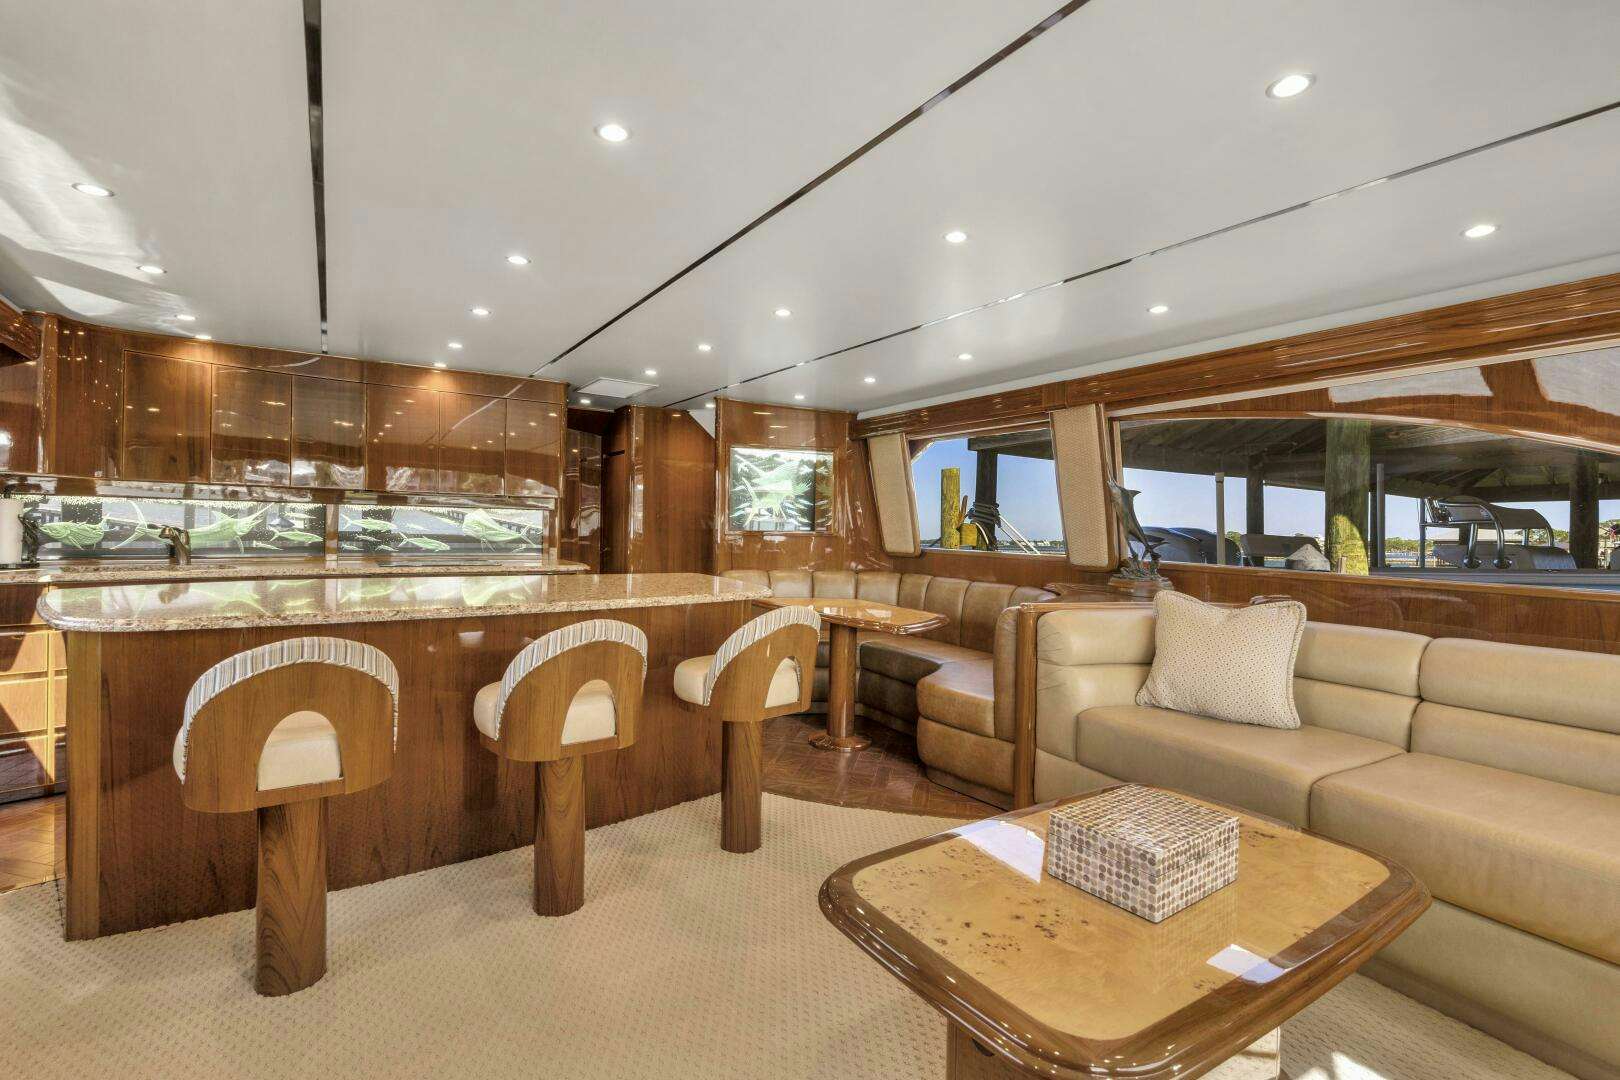 Wild eagle
Yacht for Sale